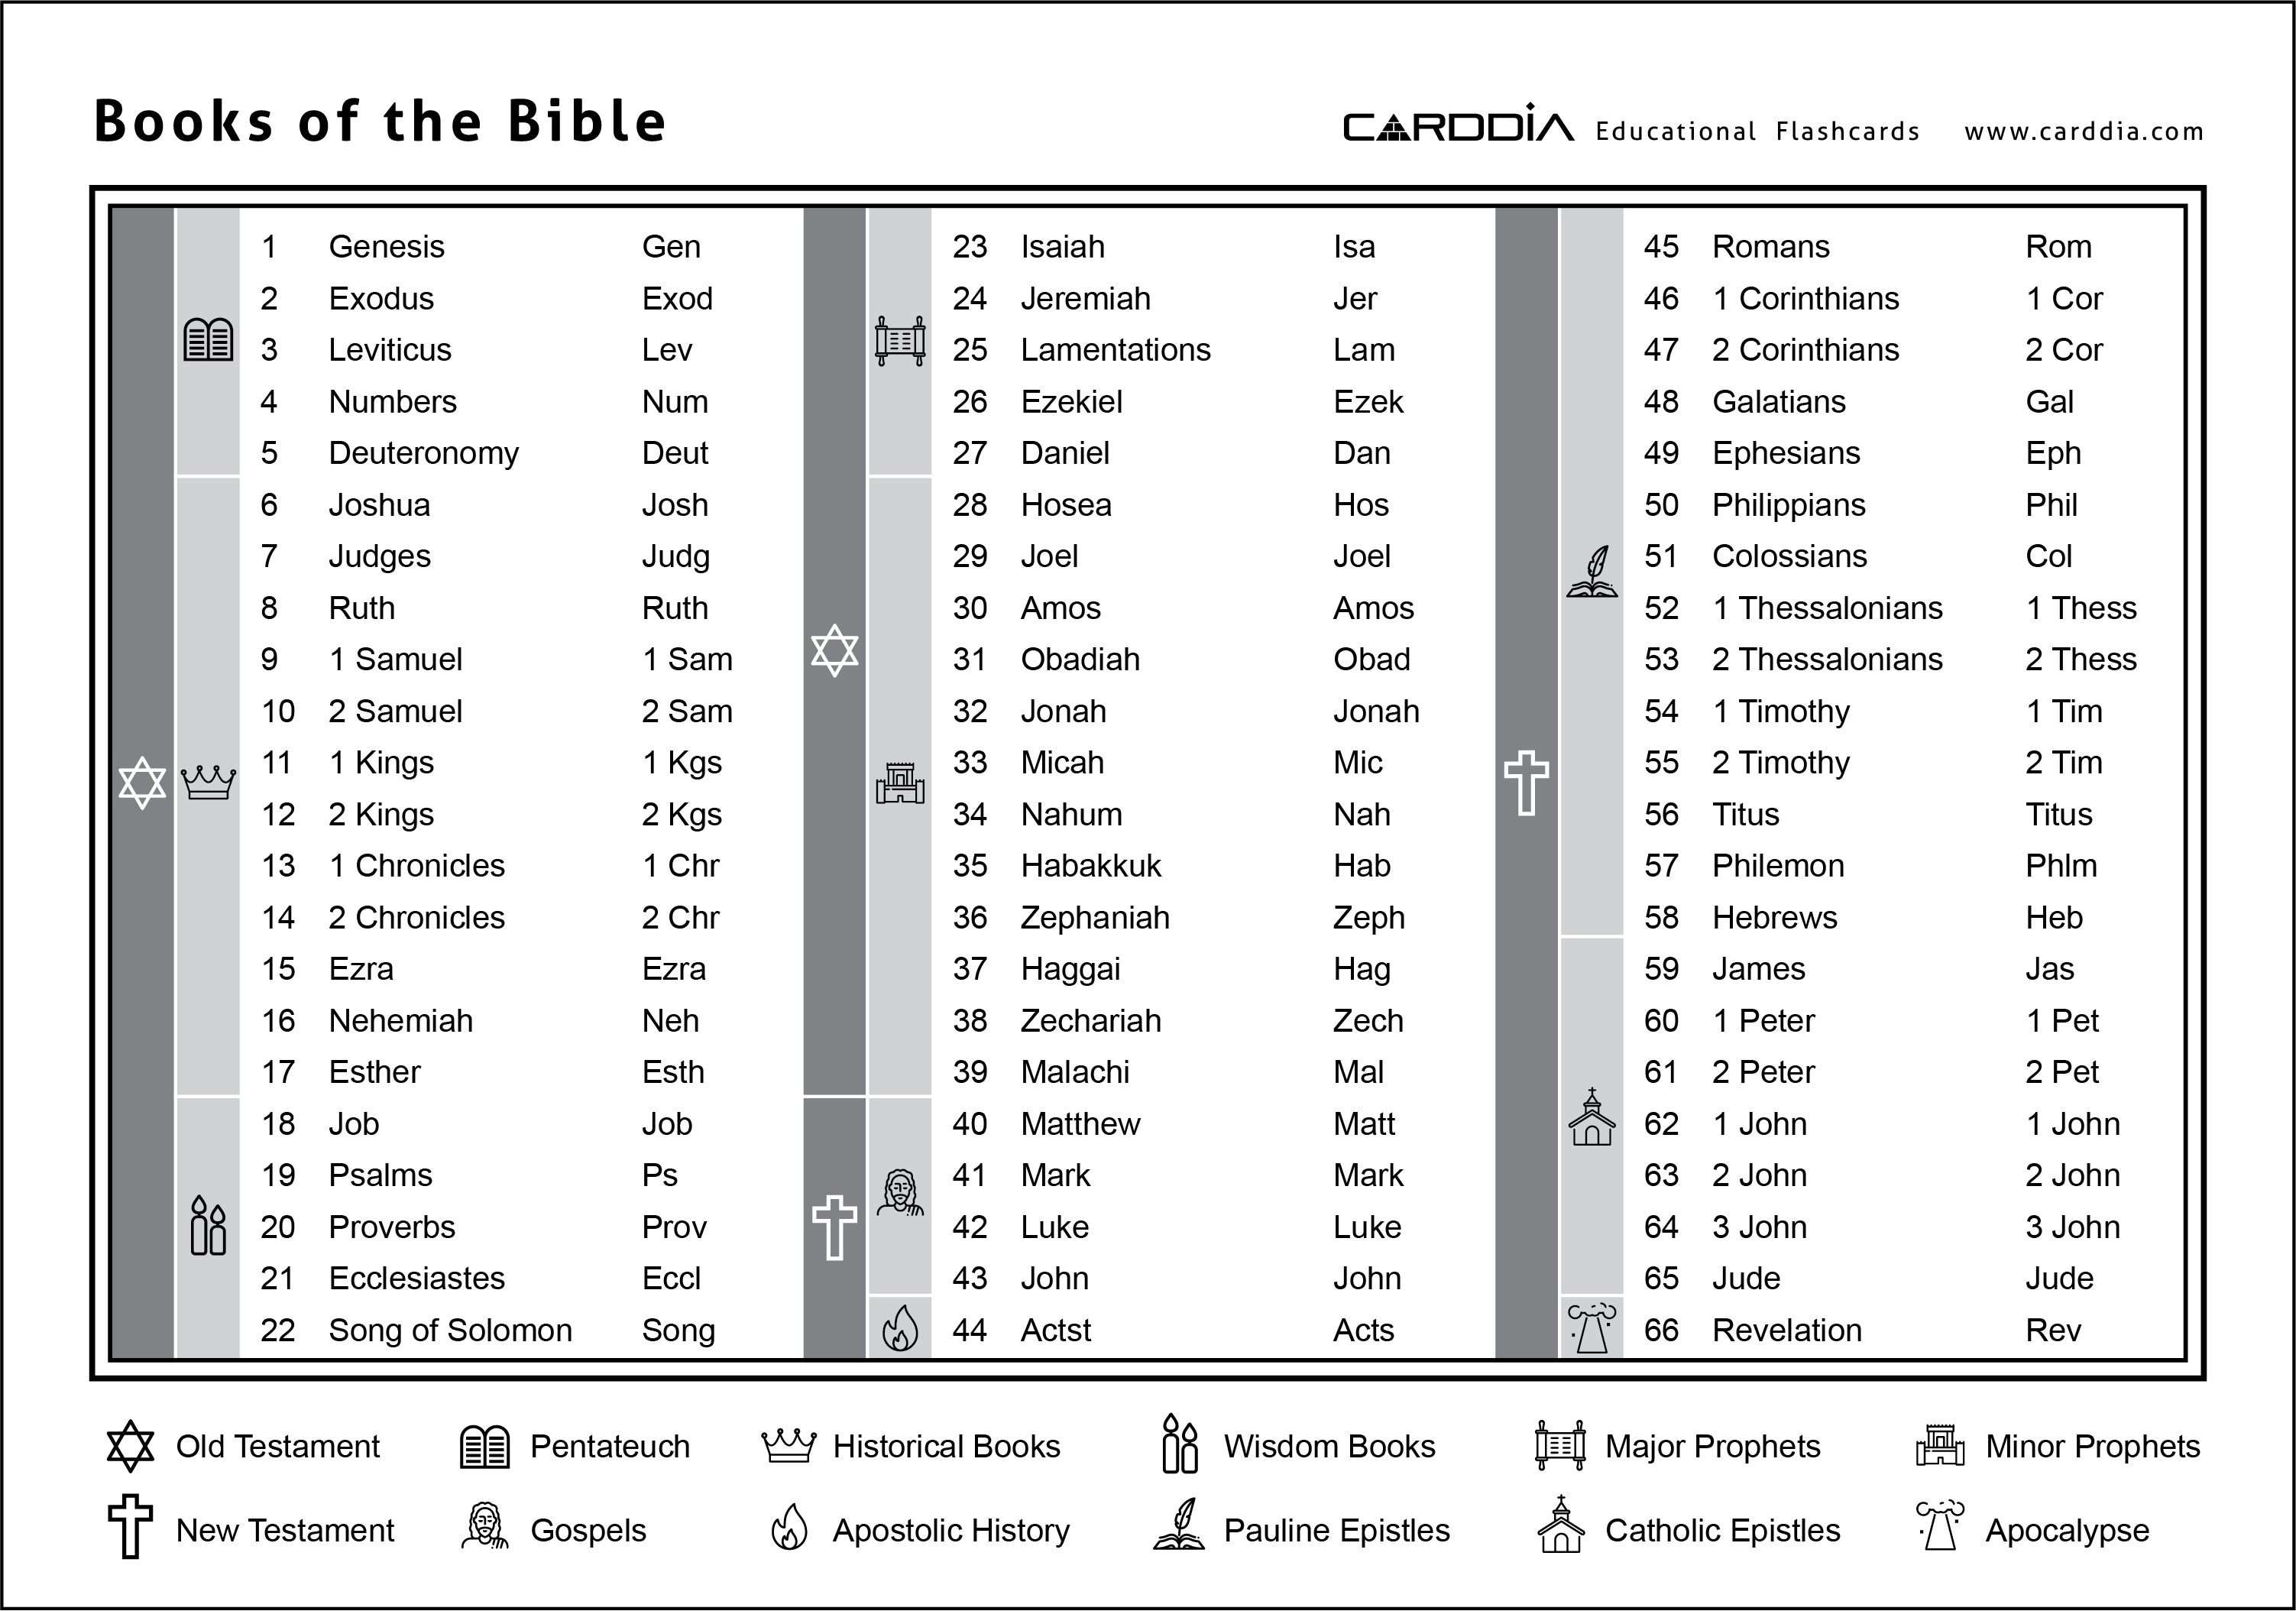 Printable List Of Books Of The Bible Free Download Carddia